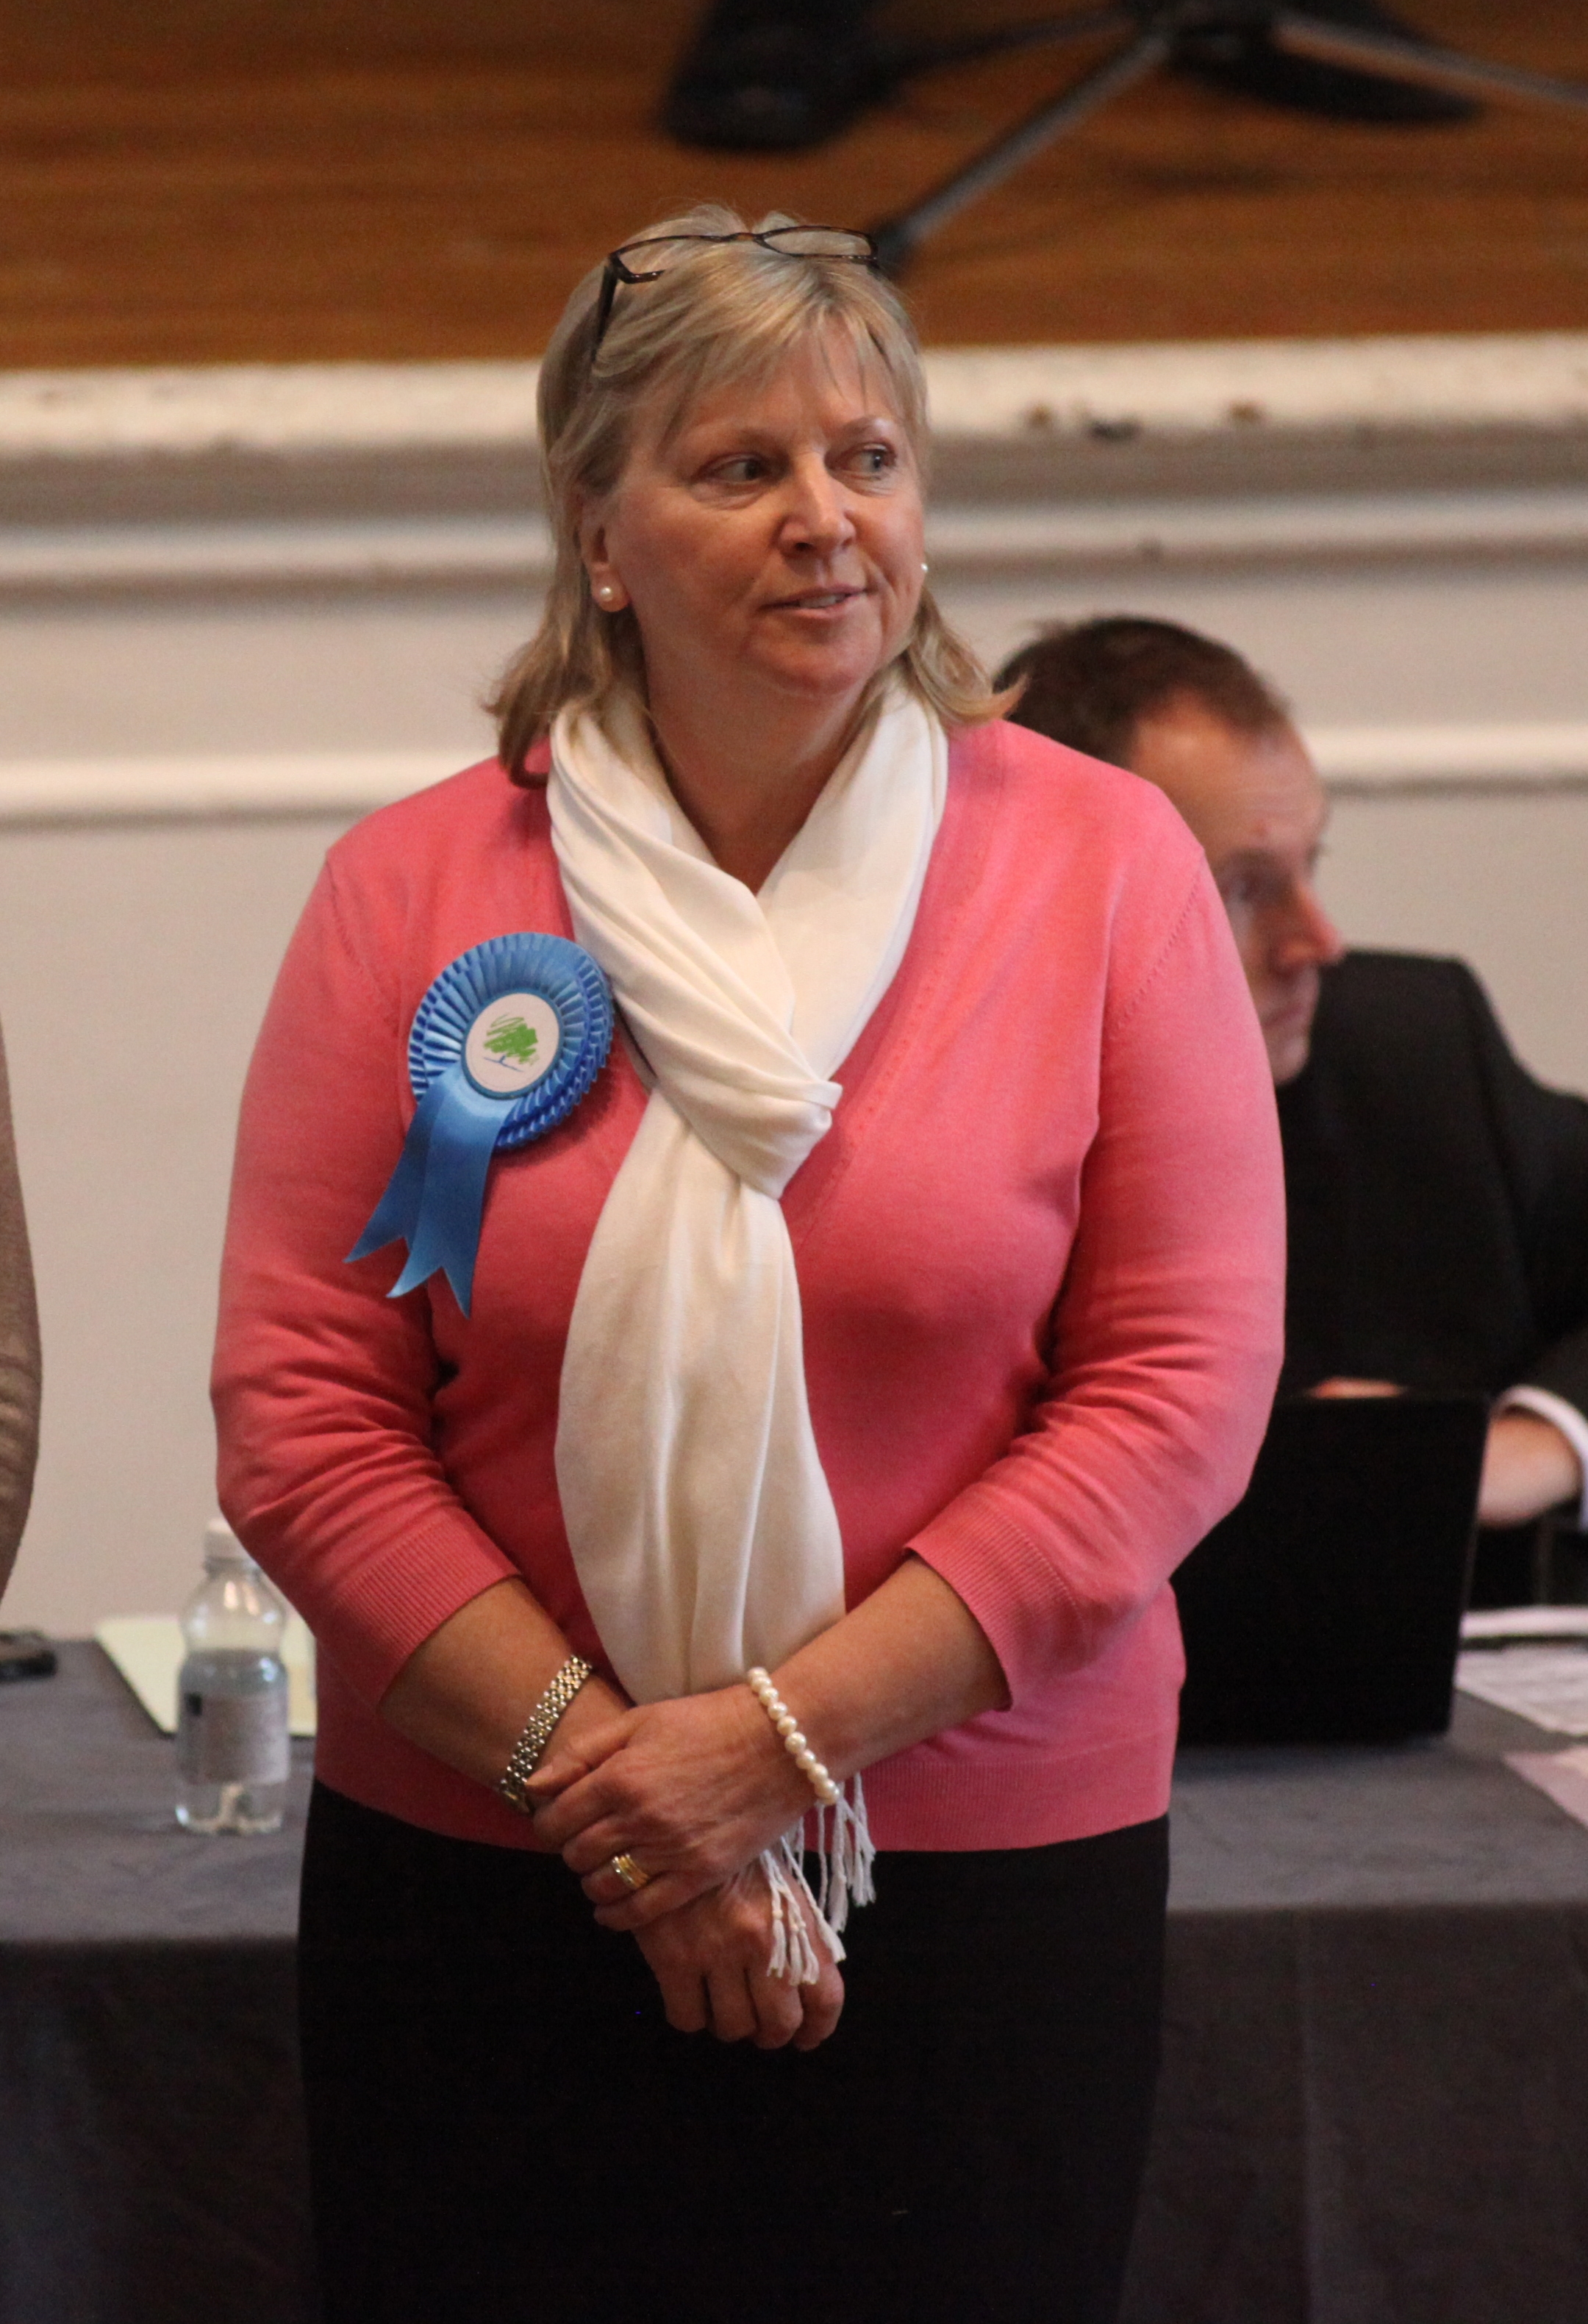 May 23, 2014 - Winchester Election Results - Conservative Caroline Horrill wins the Sparsholt seat.